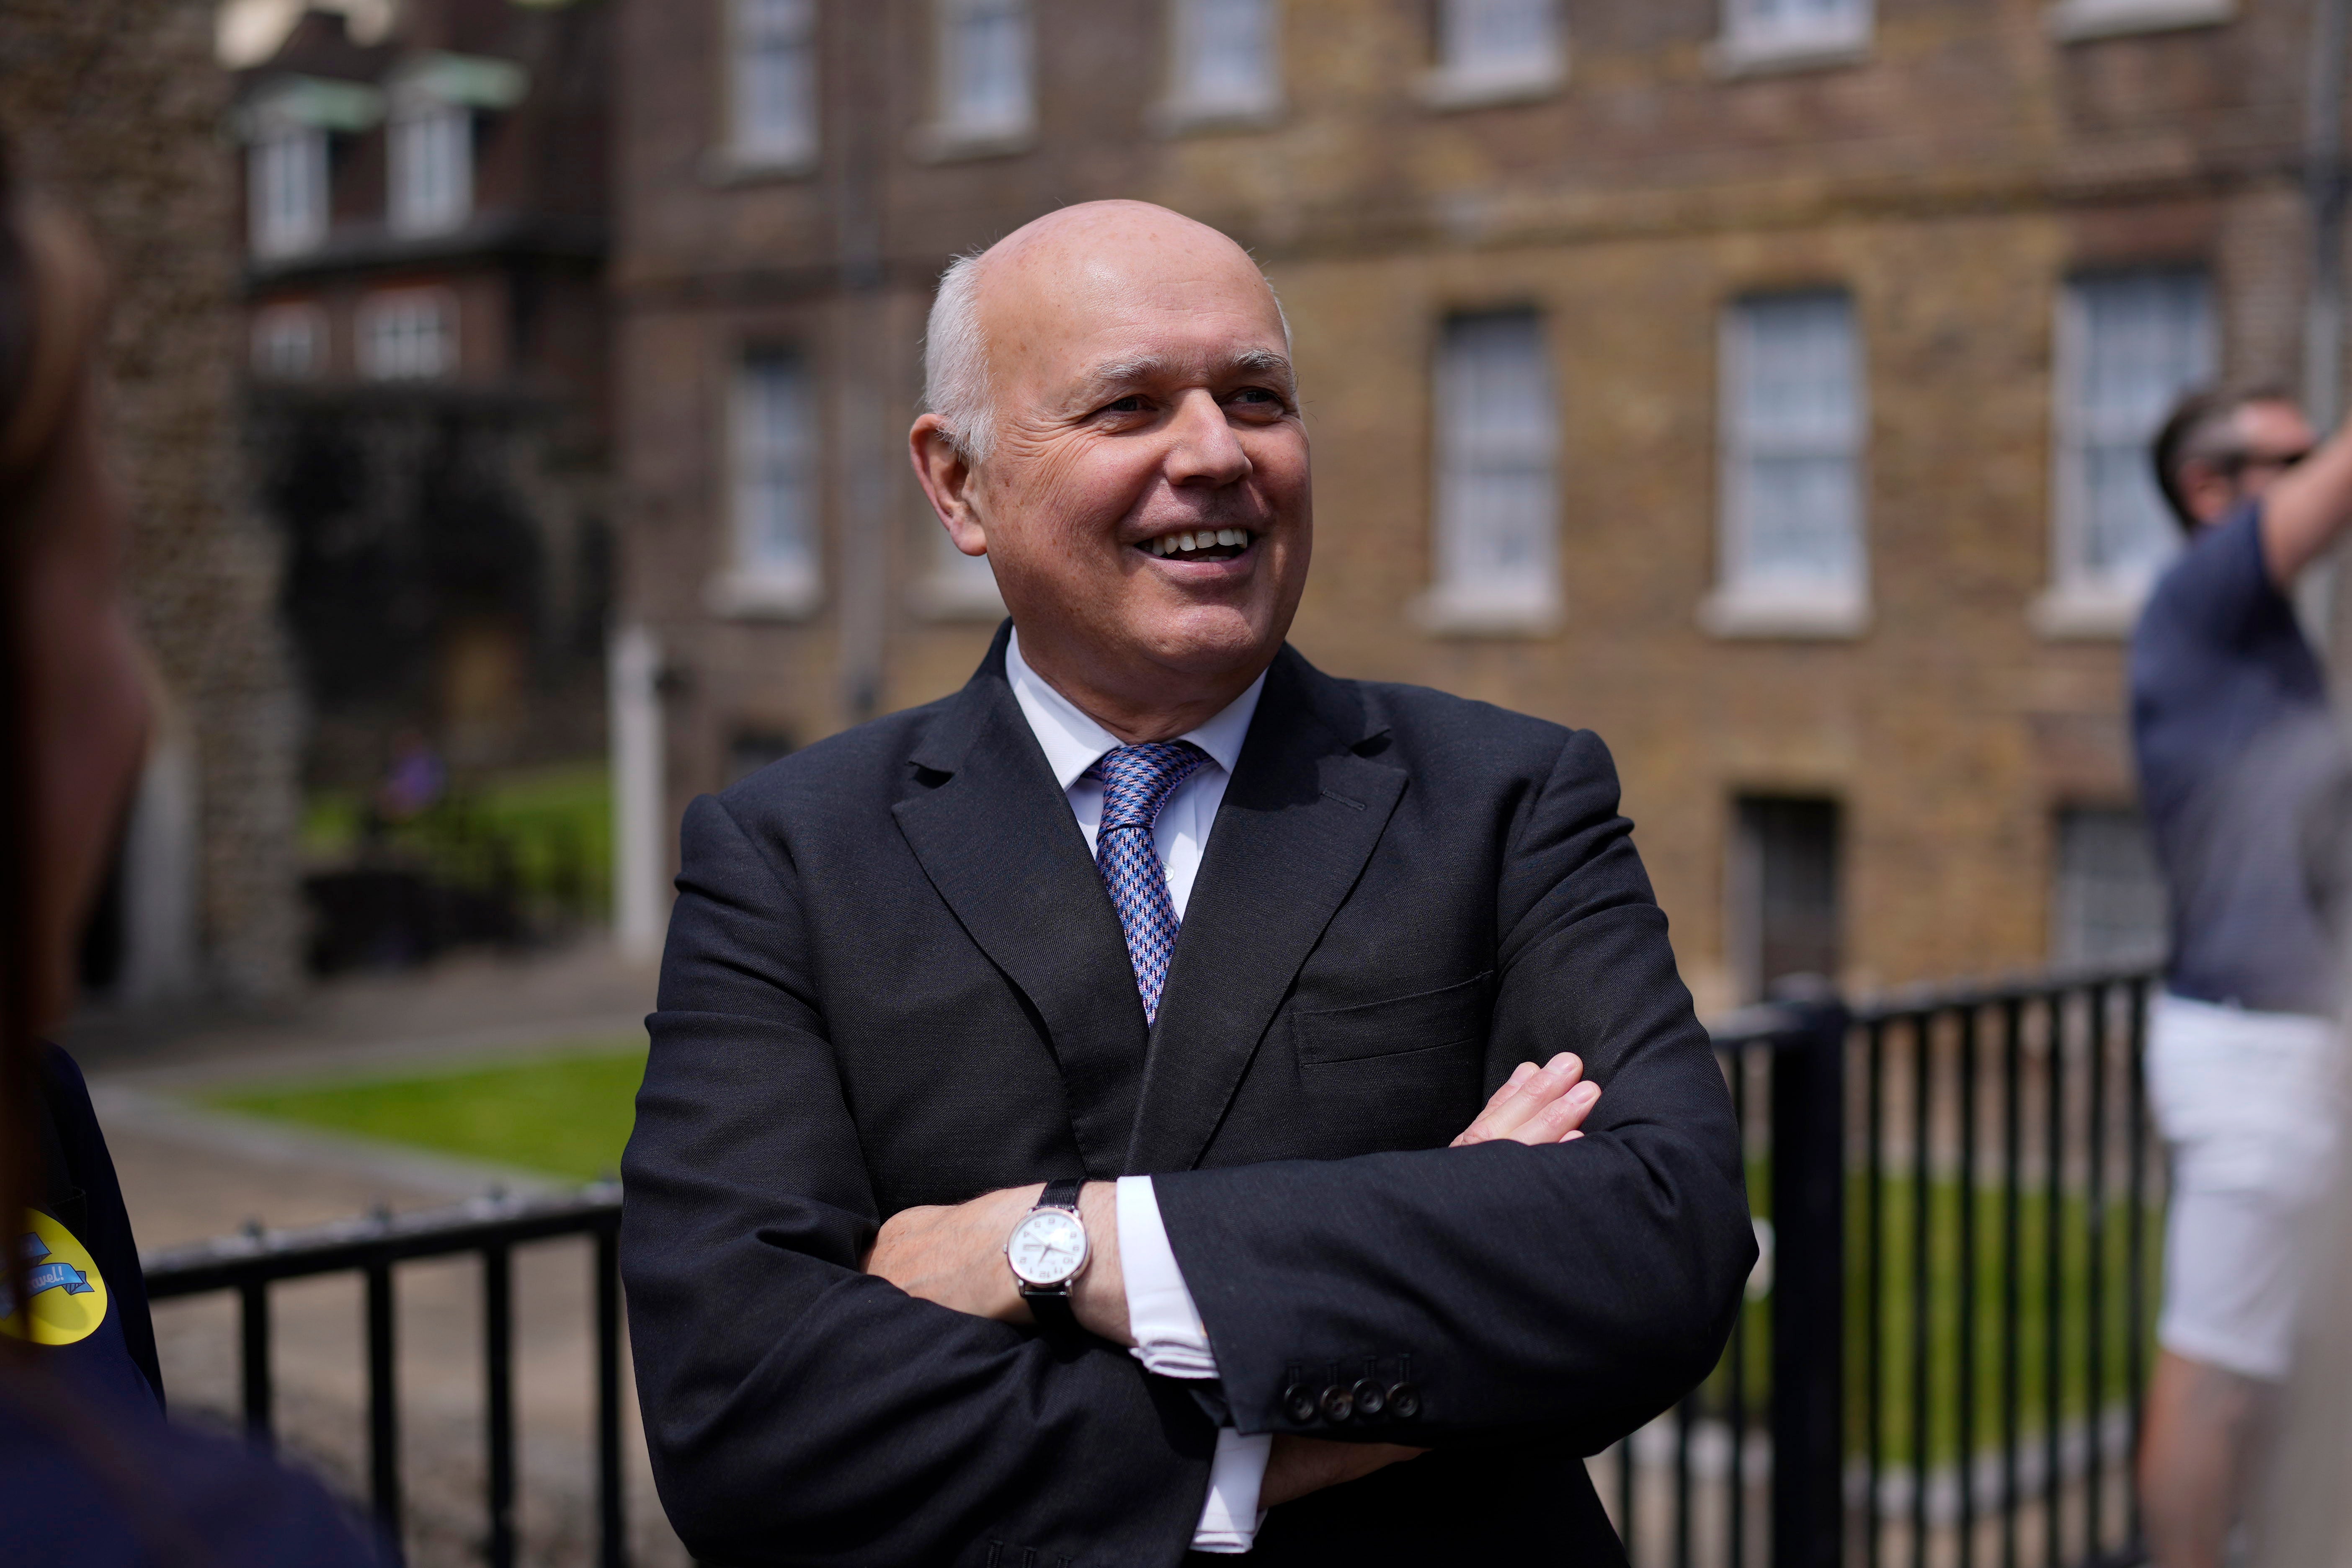 Payments must be ‘kept at the current level’ says Iain Duncan Smith and many other Tories